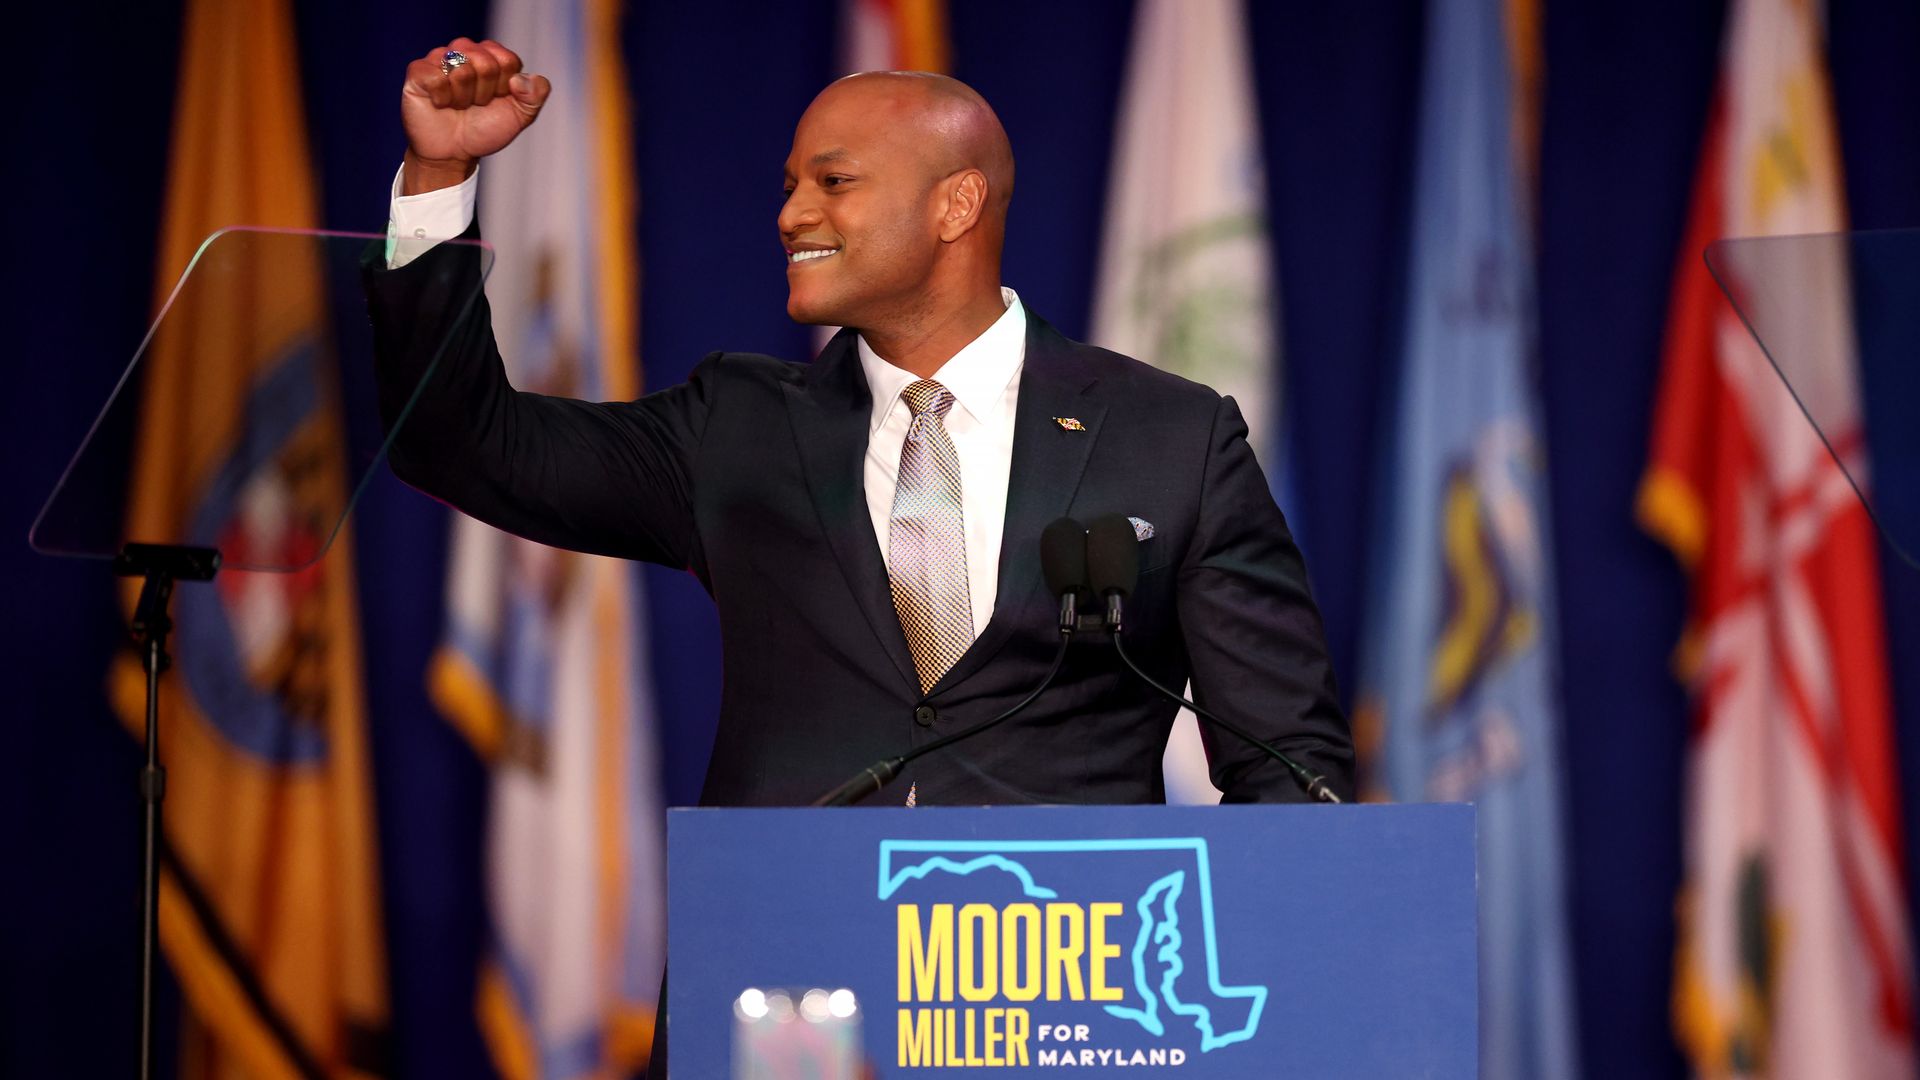 Democrat Wes Moore celebrates before addressing supporters in Baltimore, Md., on election night.